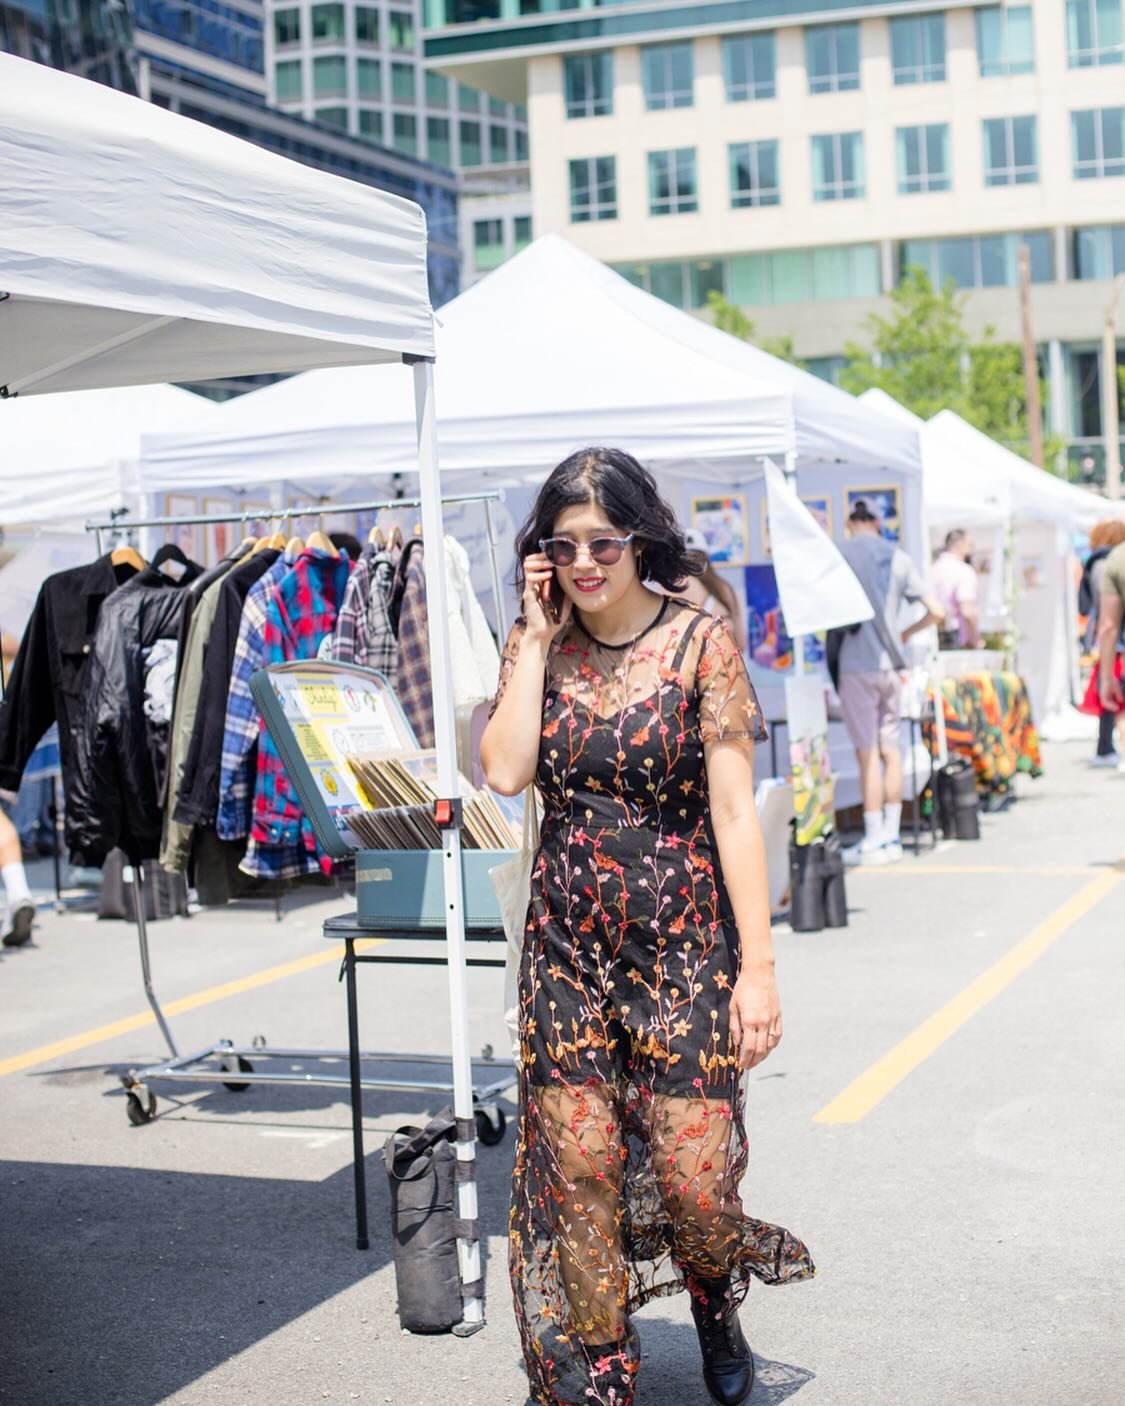 Have you heard the news? We&rsquo;re back in @seaportbos for another season of Seaport Summer Market! For 13 weekends this summer we&rsquo;ll be bringing art, crafts, fashion, food and fun to the Boston Seaport. Get your shades ready (or come buy a p